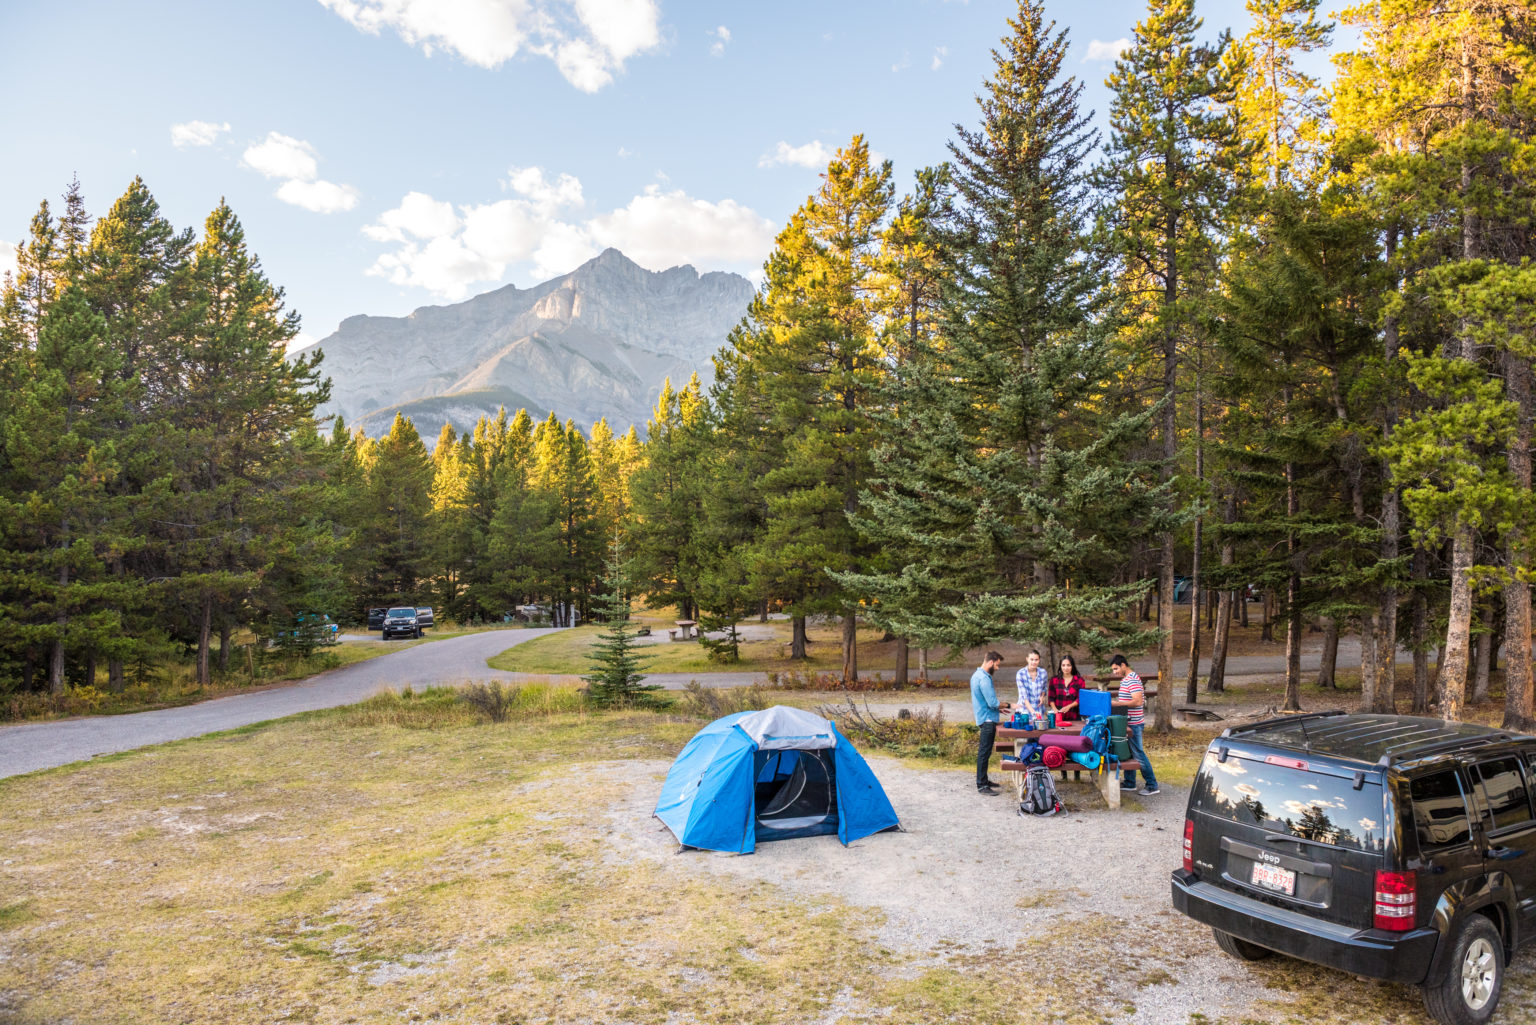 Banff Camping Tips to Know + Best Banff Campgrounds (for 2022)